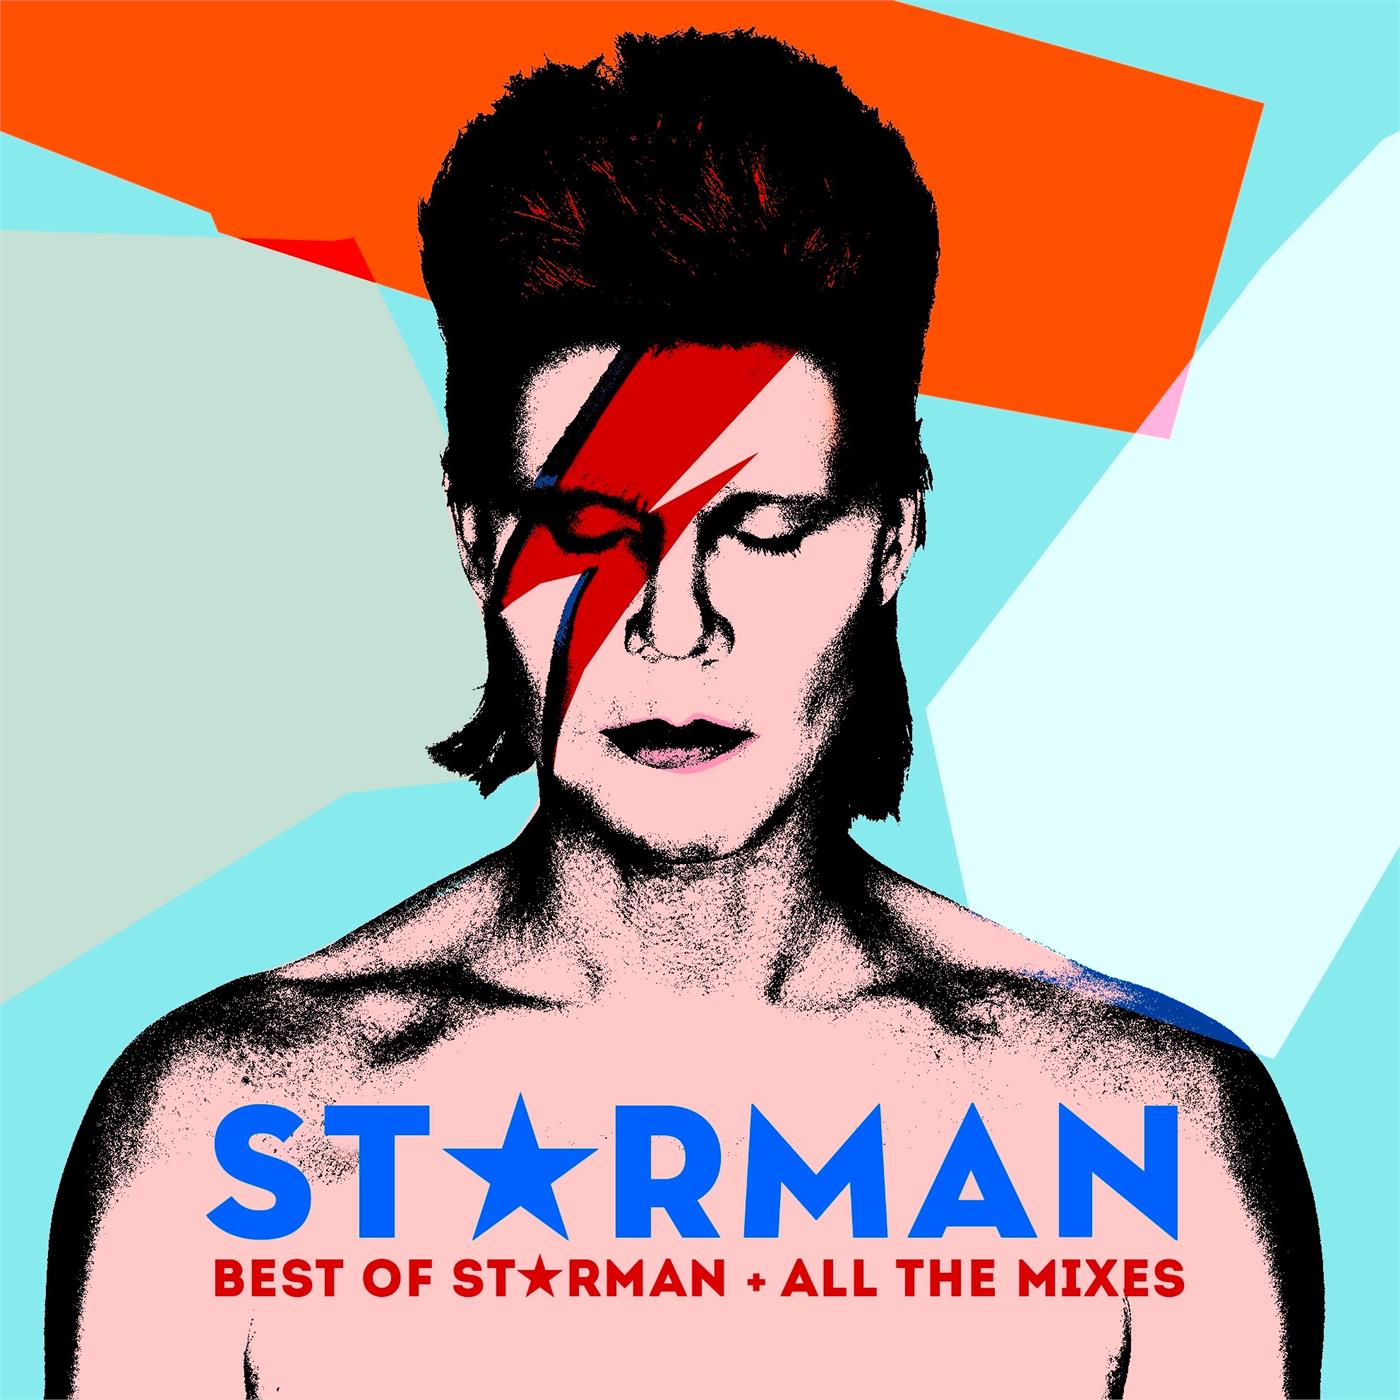 Best Of Starman + All The Mixes